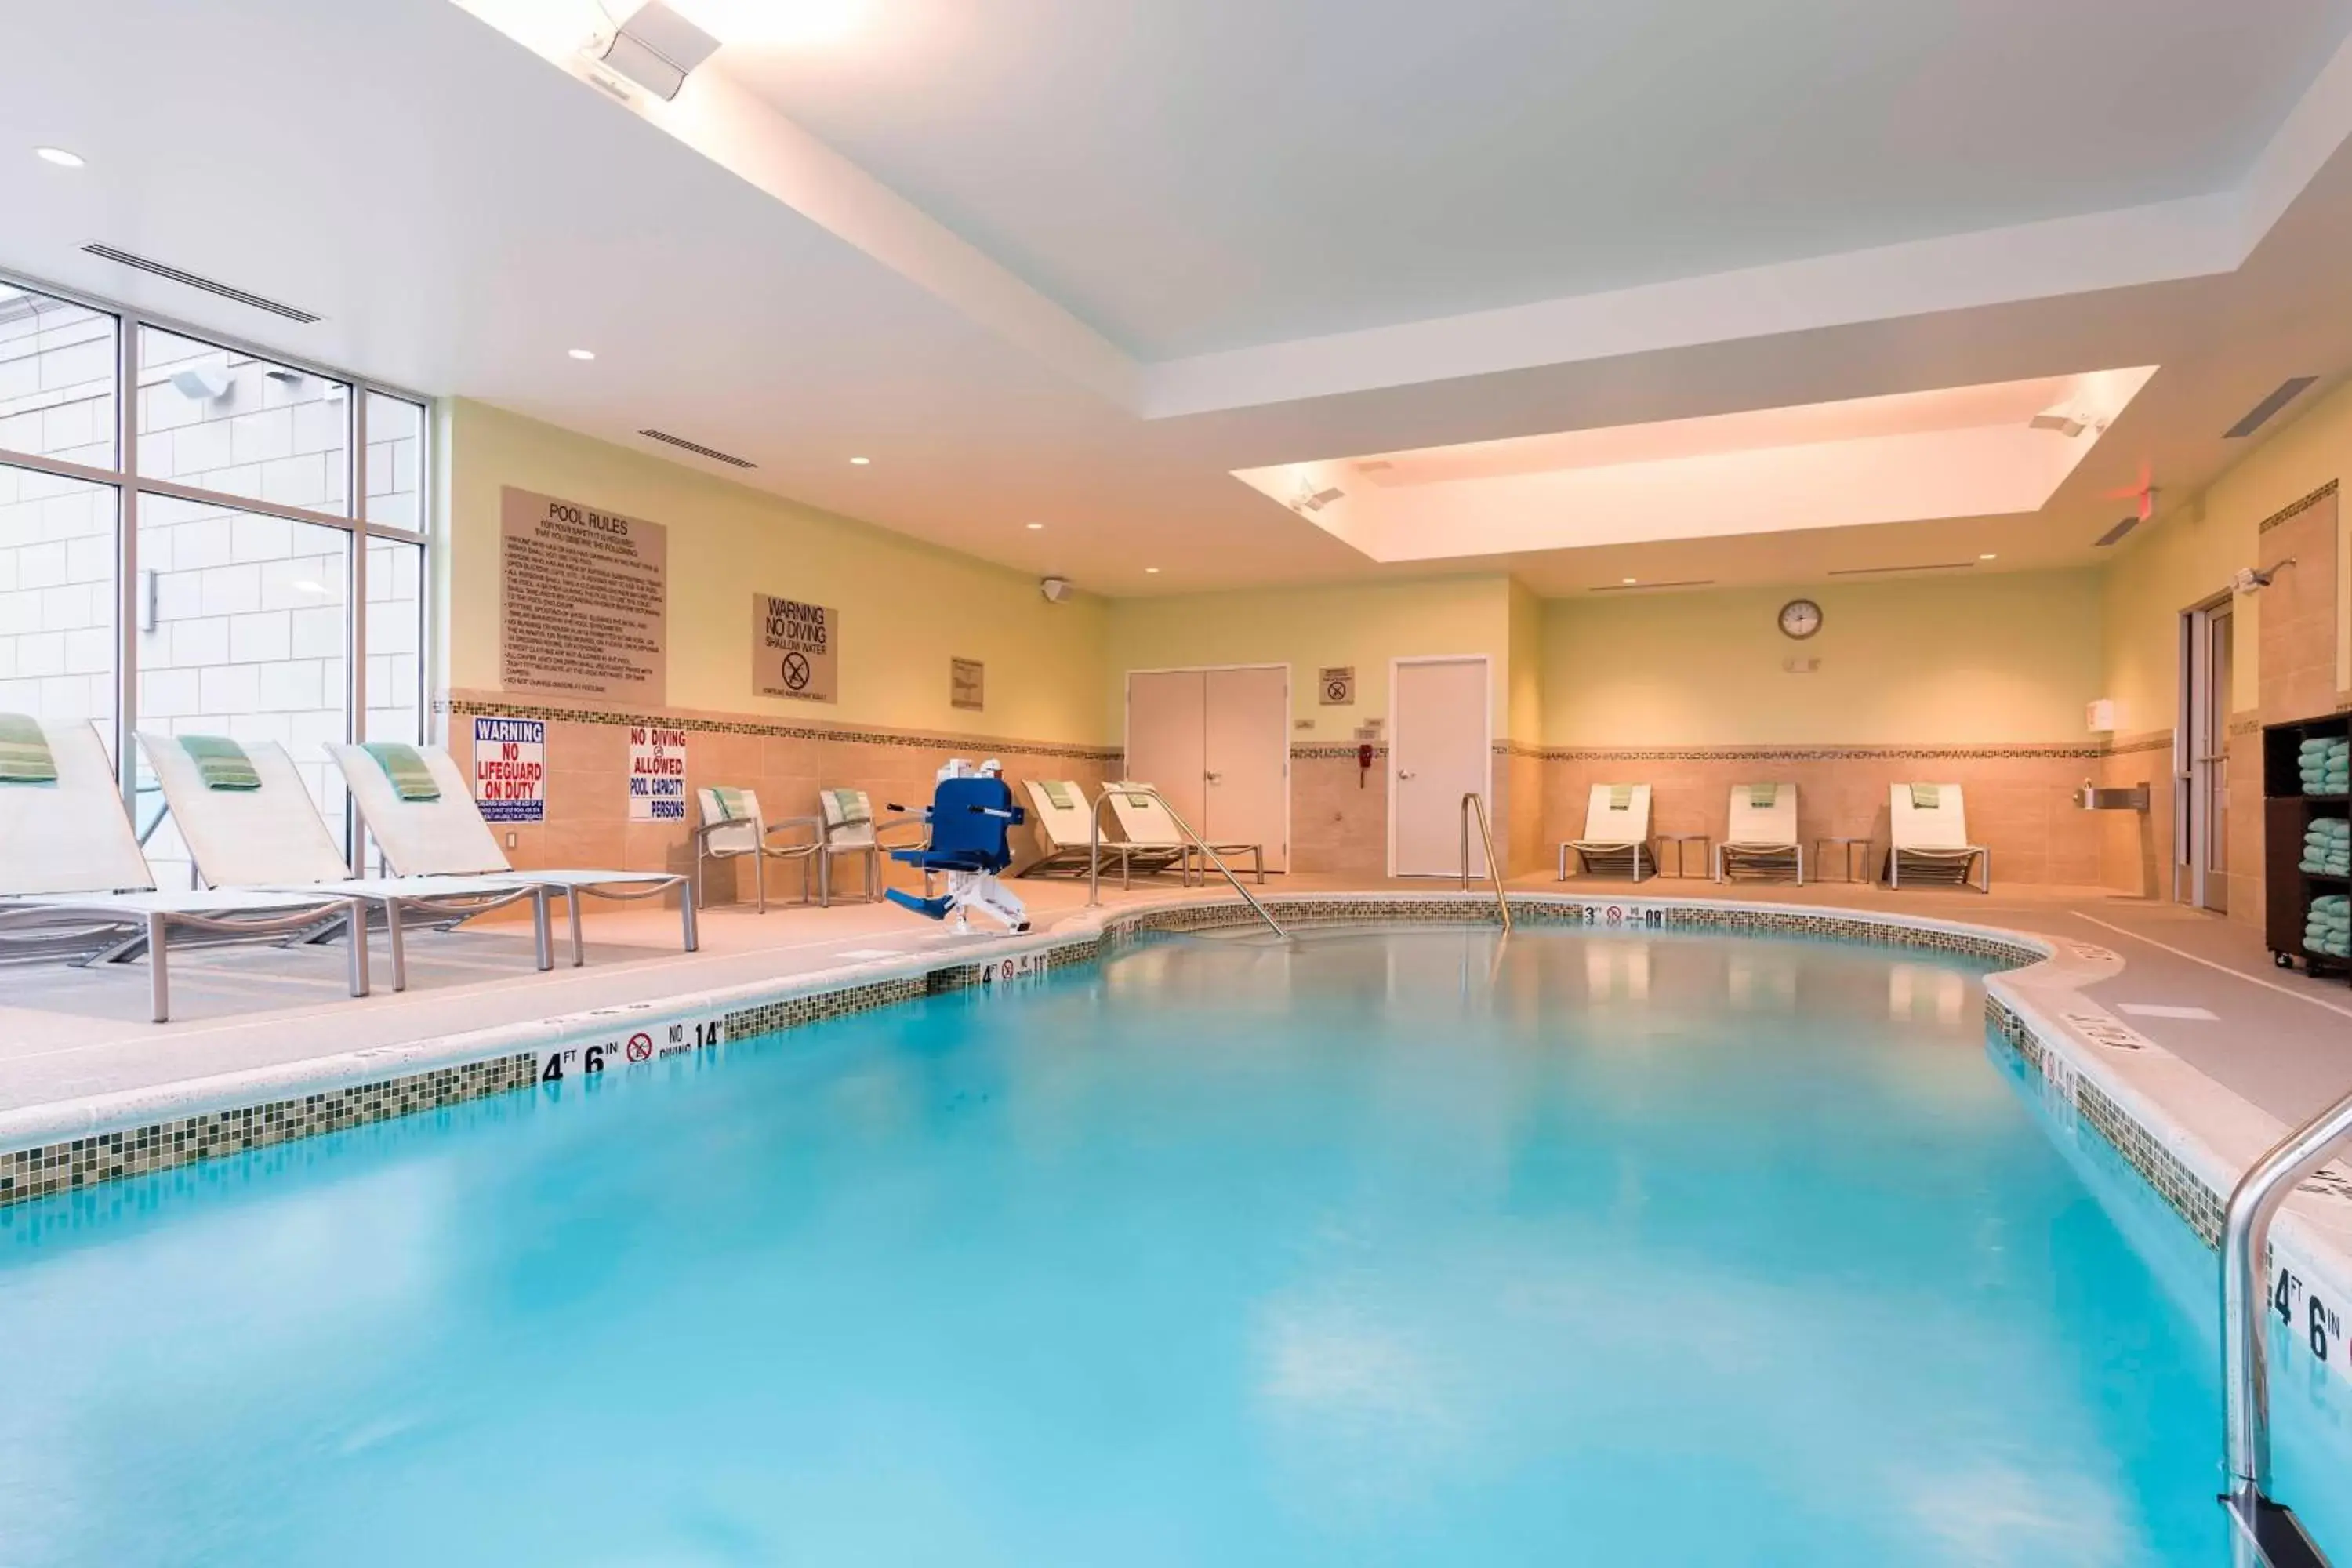 Swimming Pool in SpringHill Suites by Marriott Chicago Southeast/Munster, IN